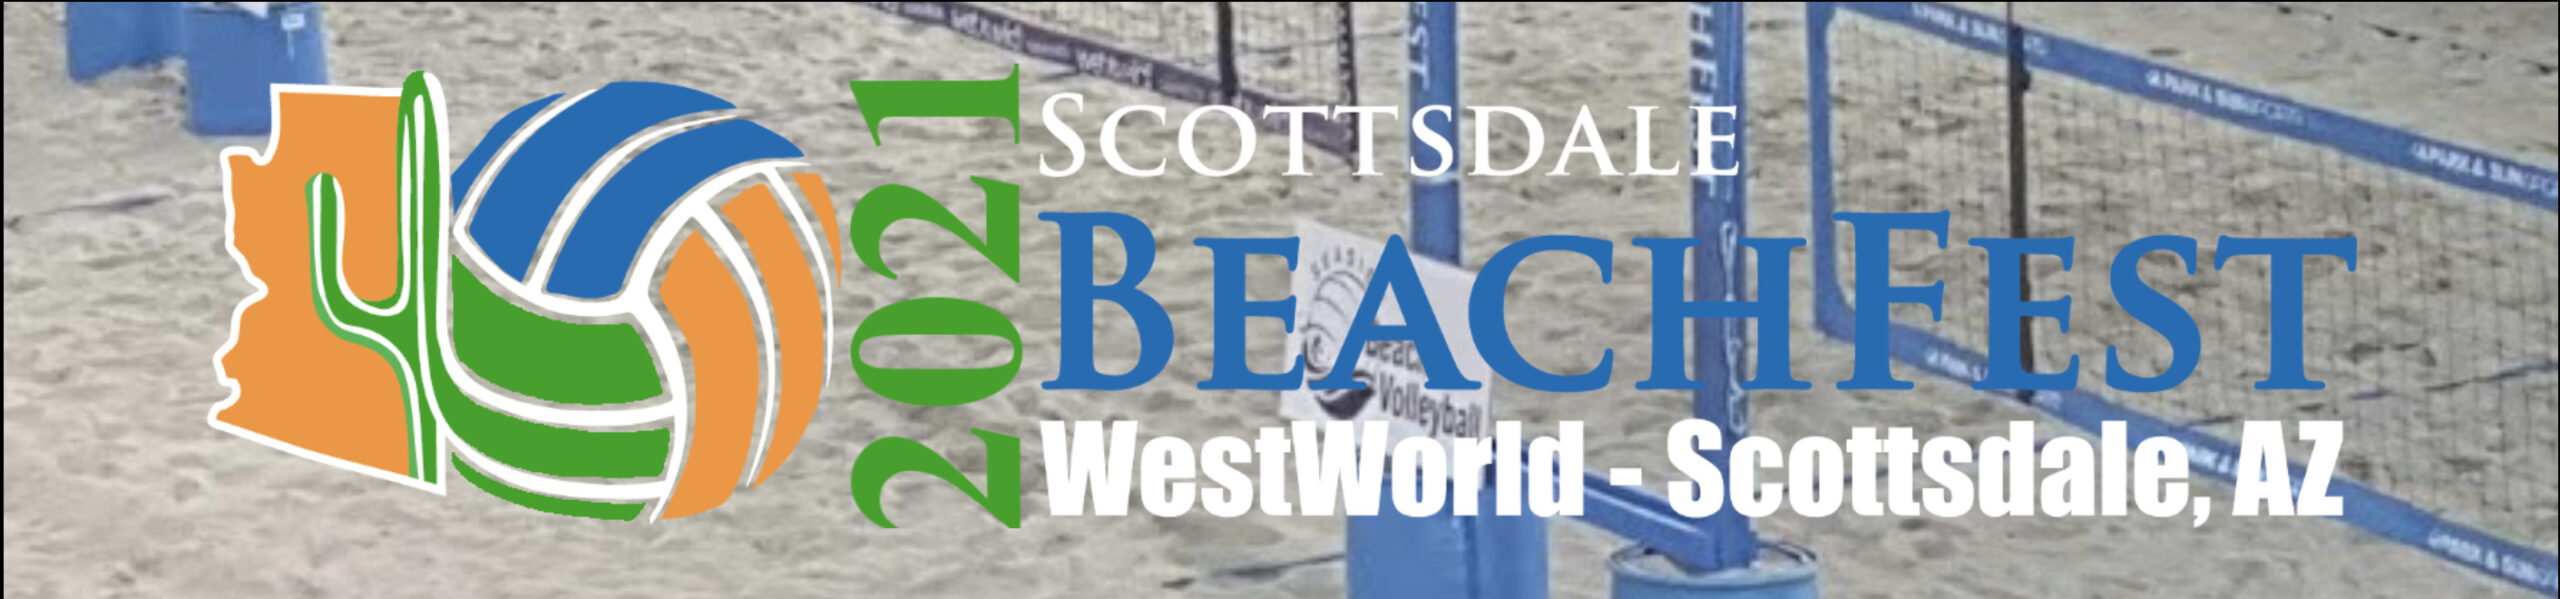 Scottsdale Beachfest will have indoor beach volleyball tournaments, marketplace, and exhibitions to explore.